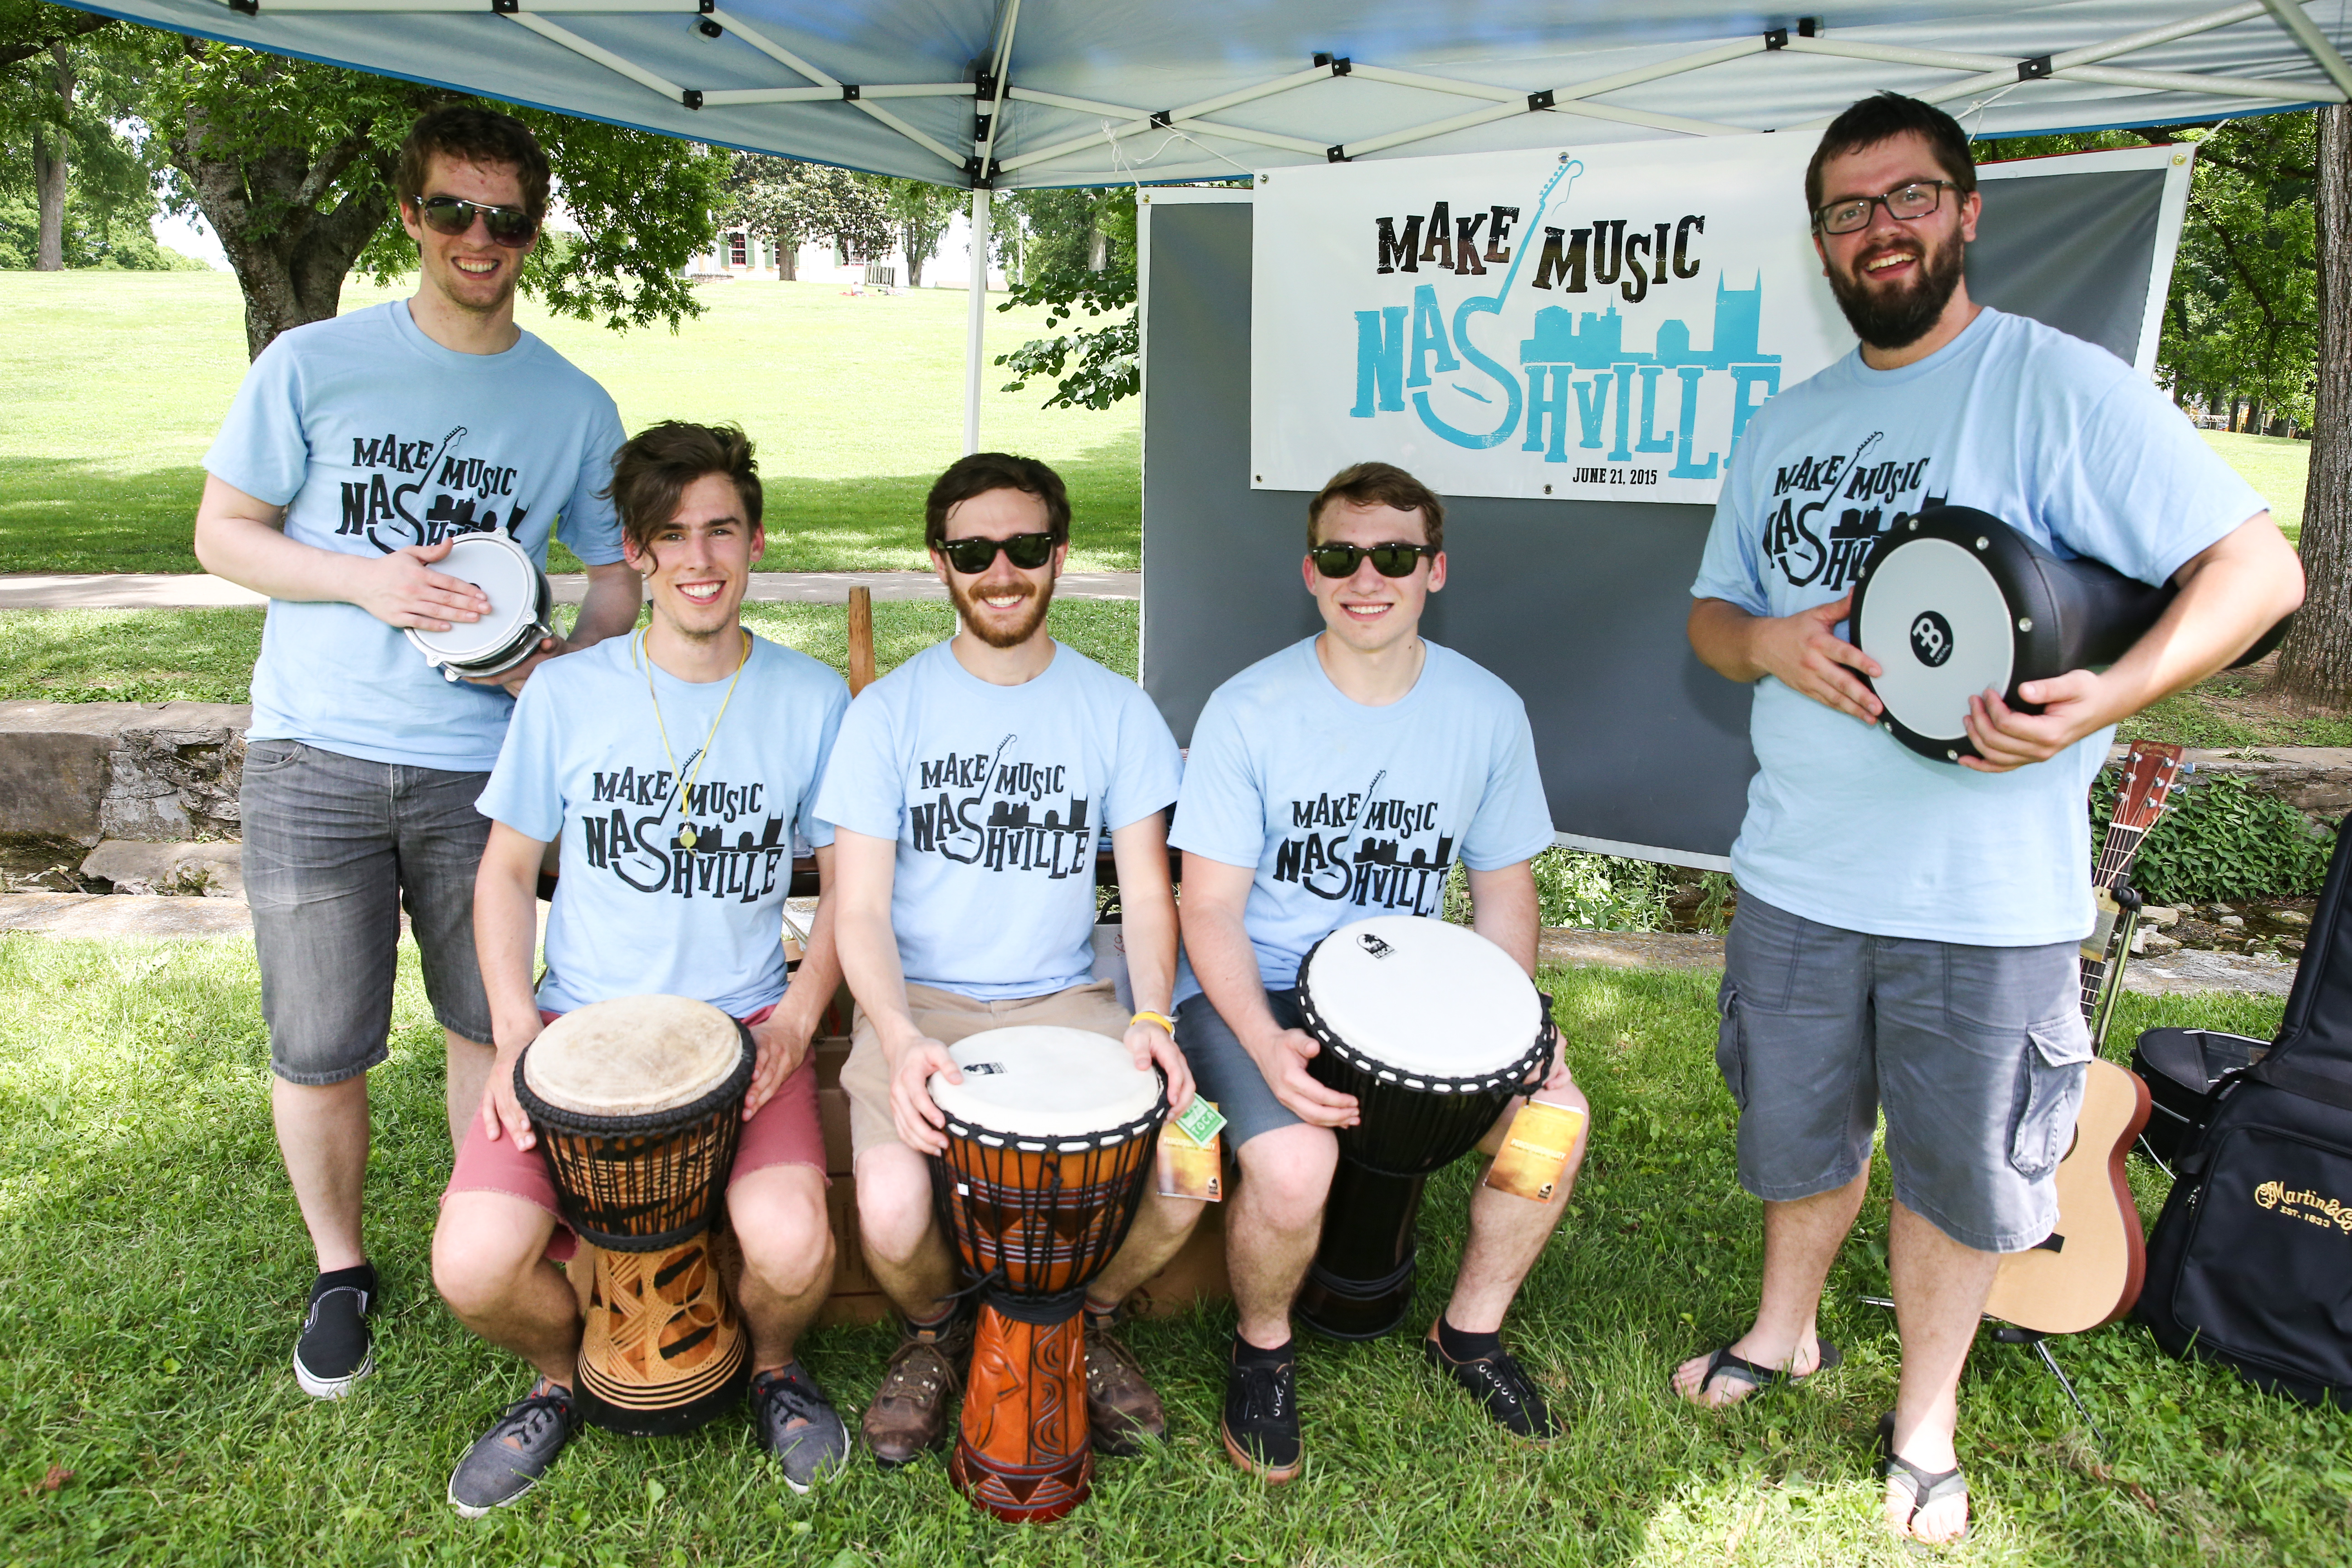 Make Music Nashville Cofounders and Volunteers at Make Music Day 2015